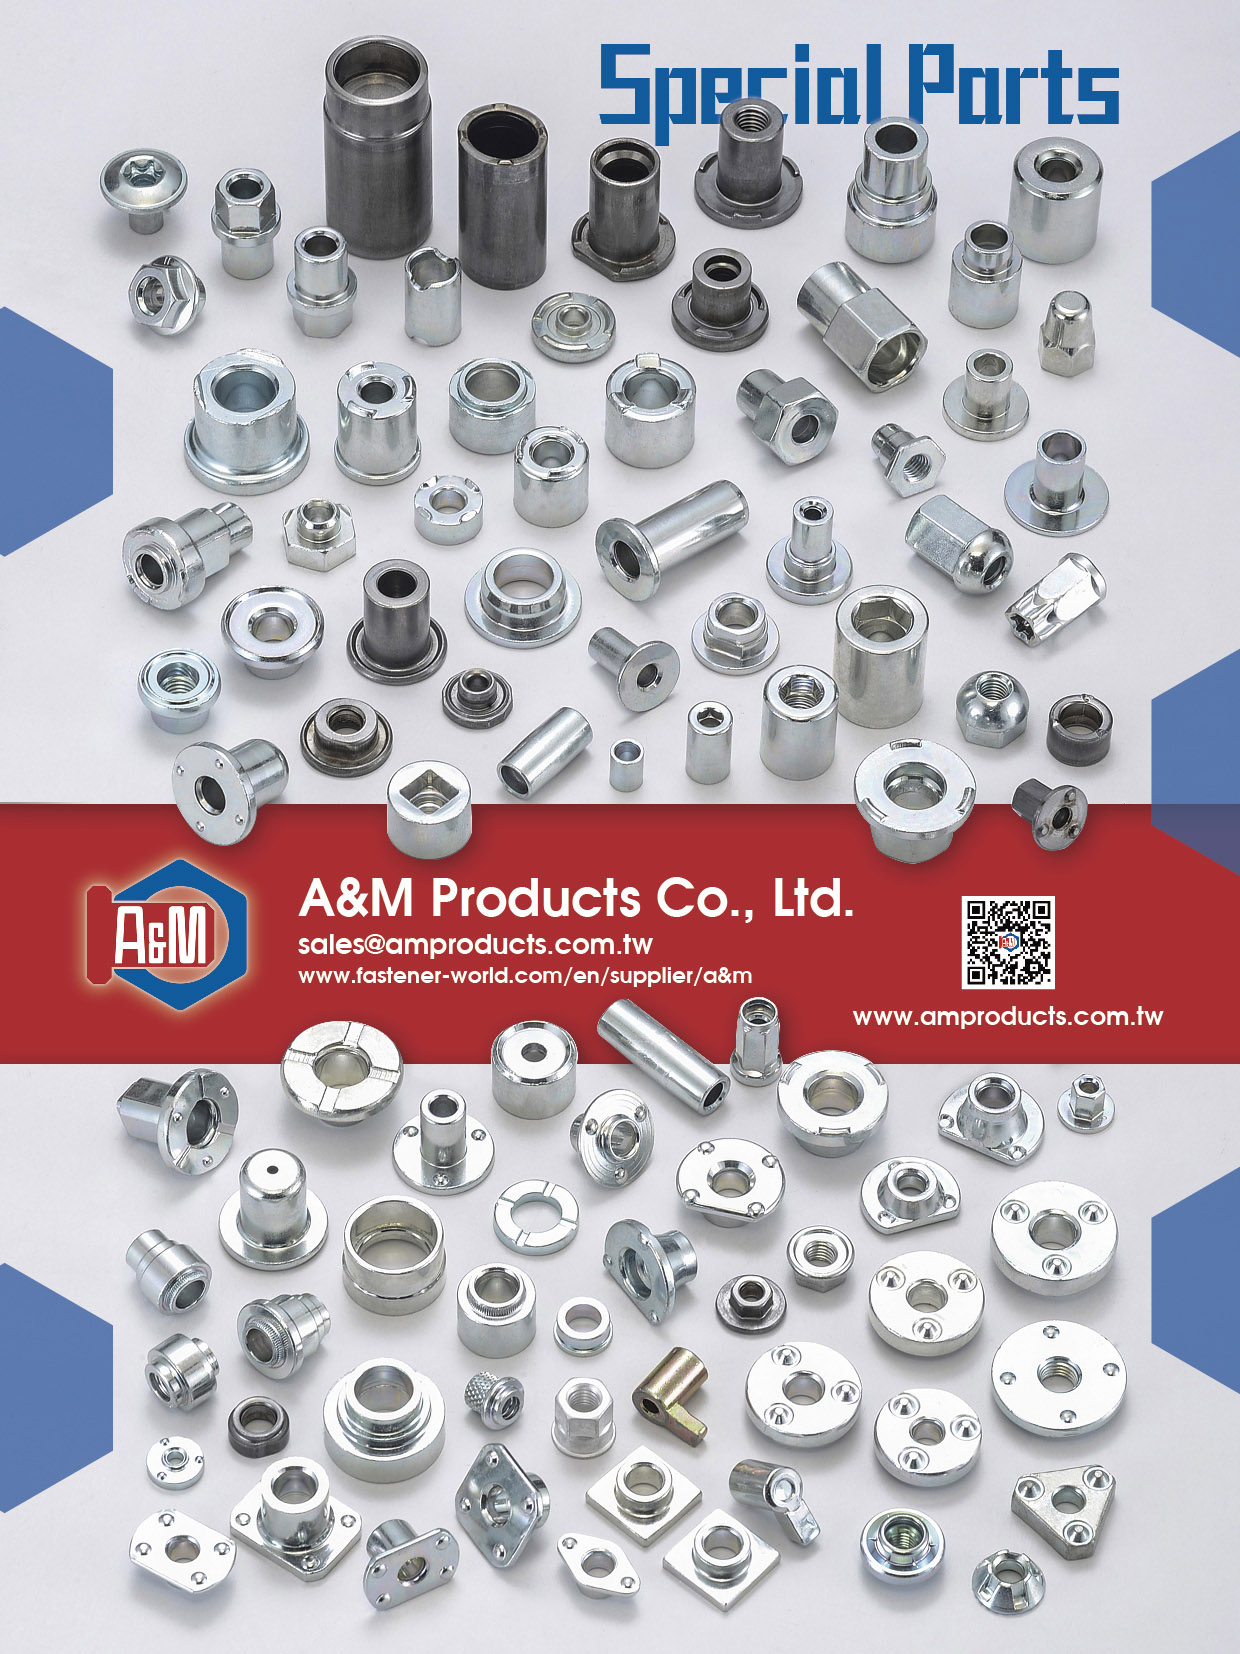 A & M PRODUCTS CO., LTD. , WELD NUTS,SPECIAL NUTS,NUT AND WASHER ASSEMBLY,SPECIAL SQUARE & HEX NUT,FLANGE NUTS,SPECIAL NUTS,NYLON FLANGE NUTS,PREVAILING TORQUE NUTS,WELD NUTS,BUSHING AND SPACER,SPECIAL NUTS,SPECIAL FLANGE NUTS